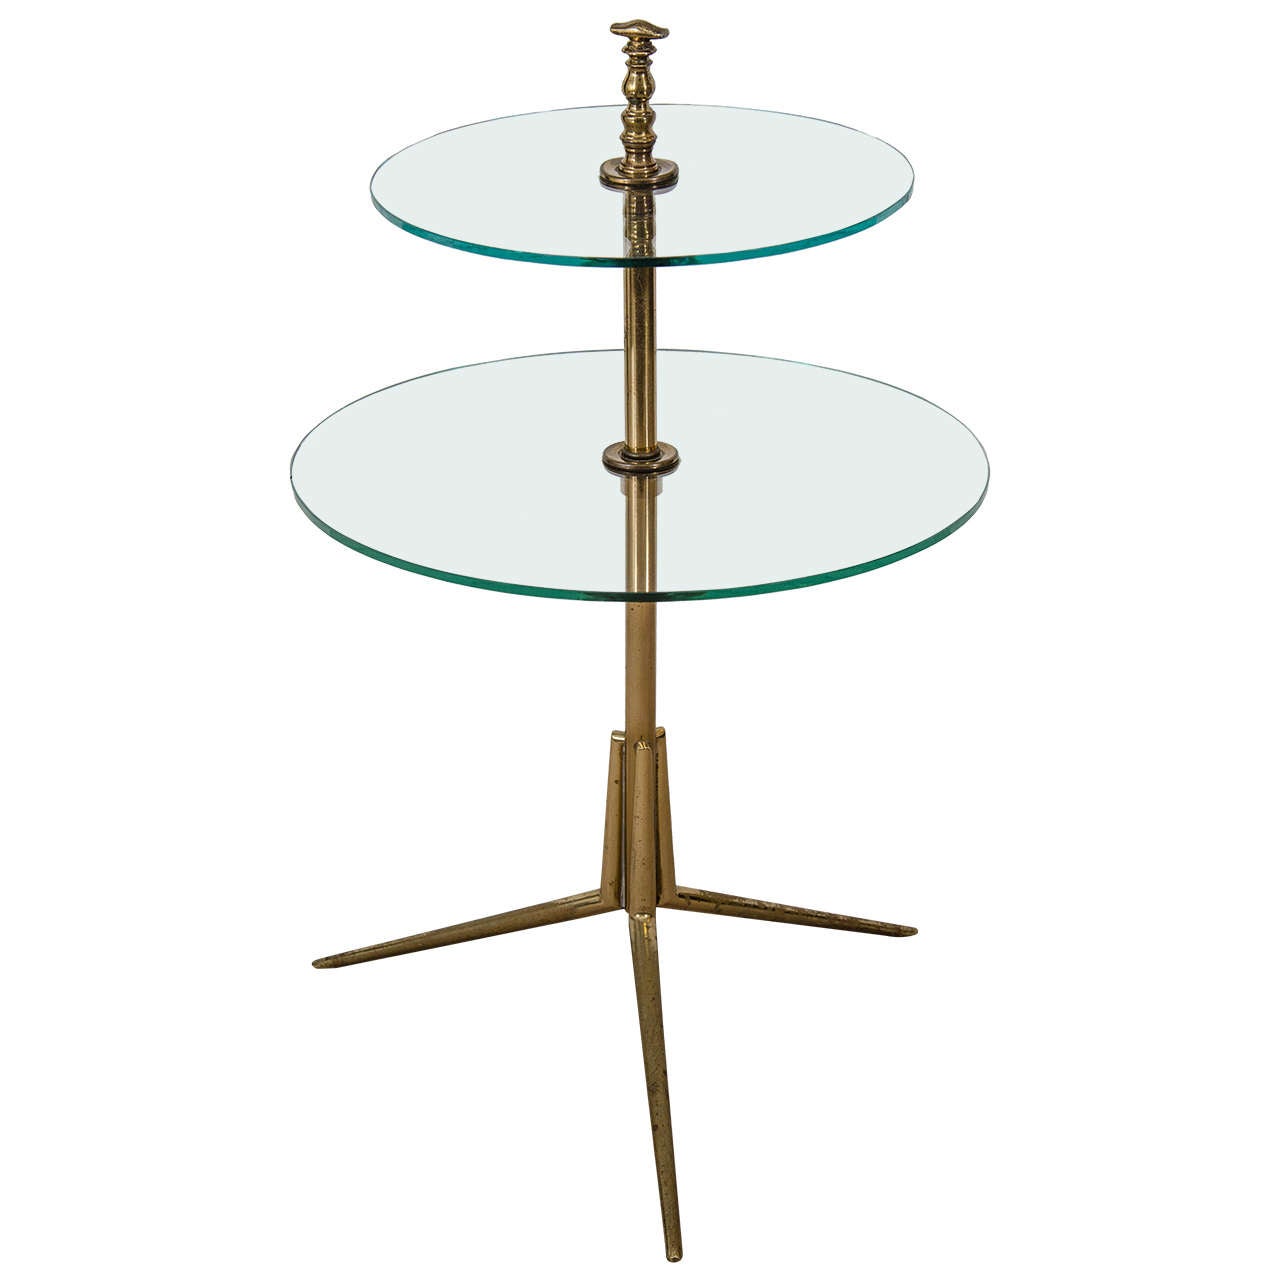 Vintage Modern Brass and Glass Side Table after Gio Ponti, Italy